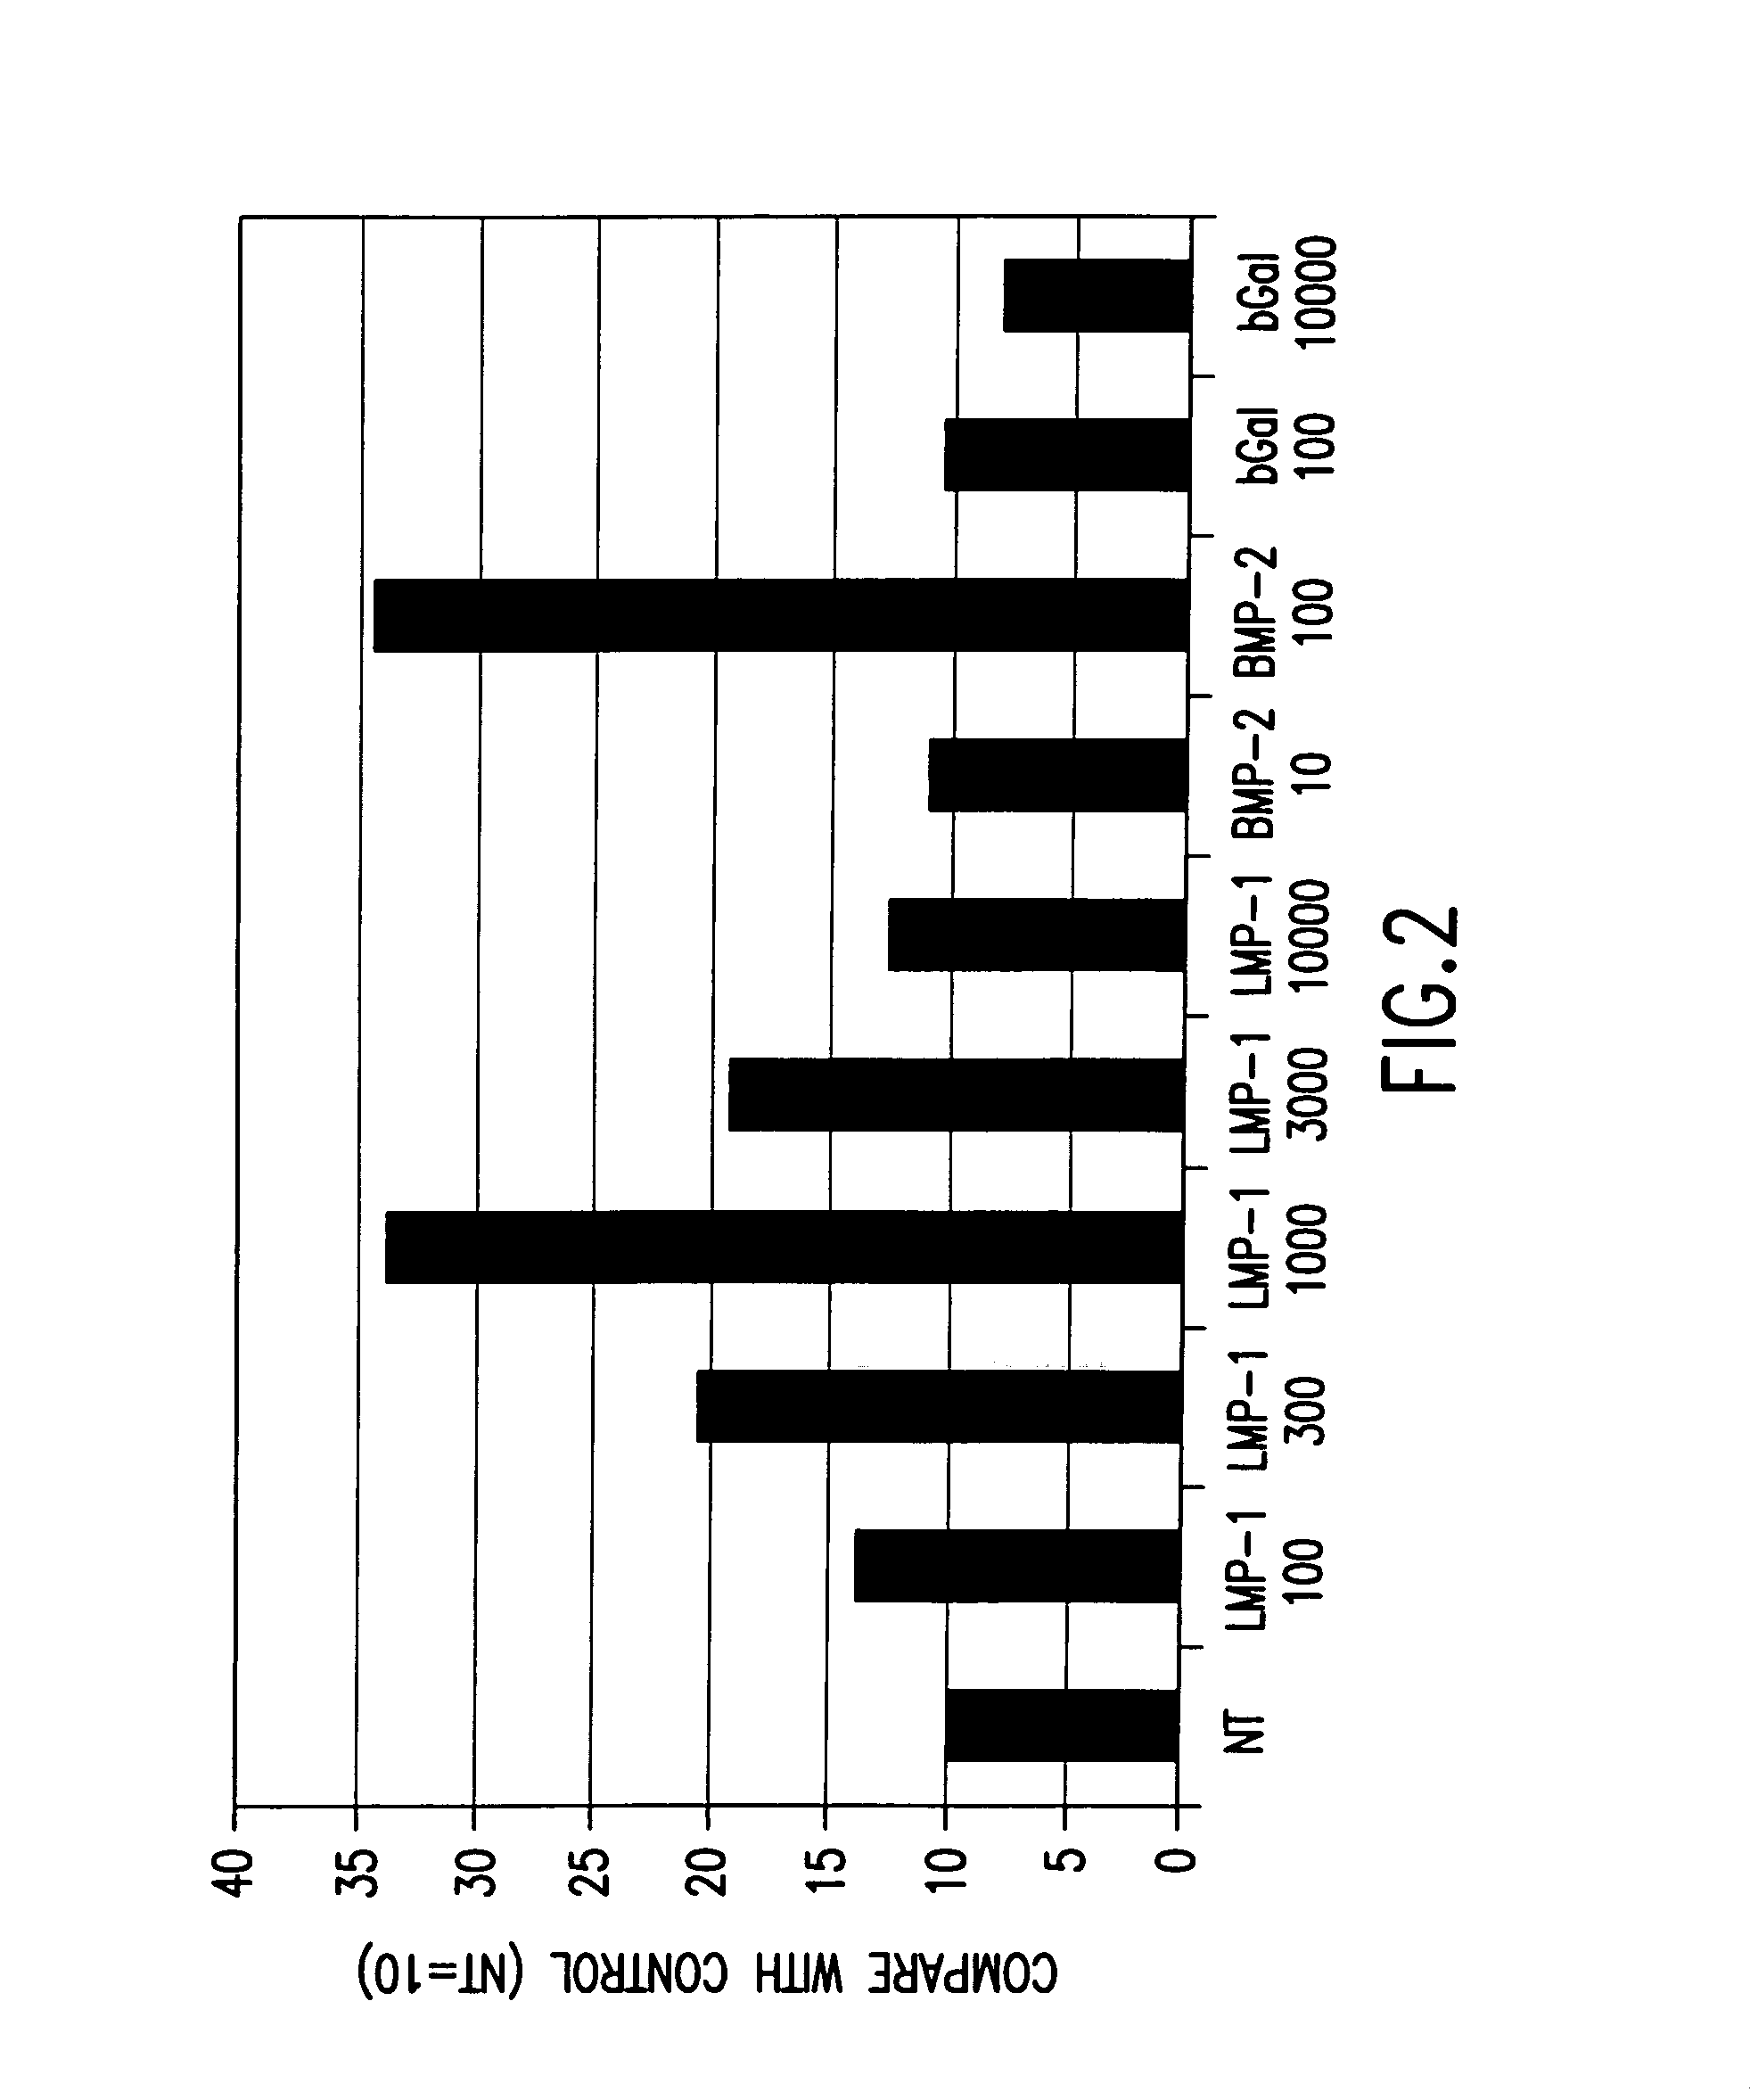 Methods of inducing or increasing the expression of proteoglycans such as aggrecan in cells